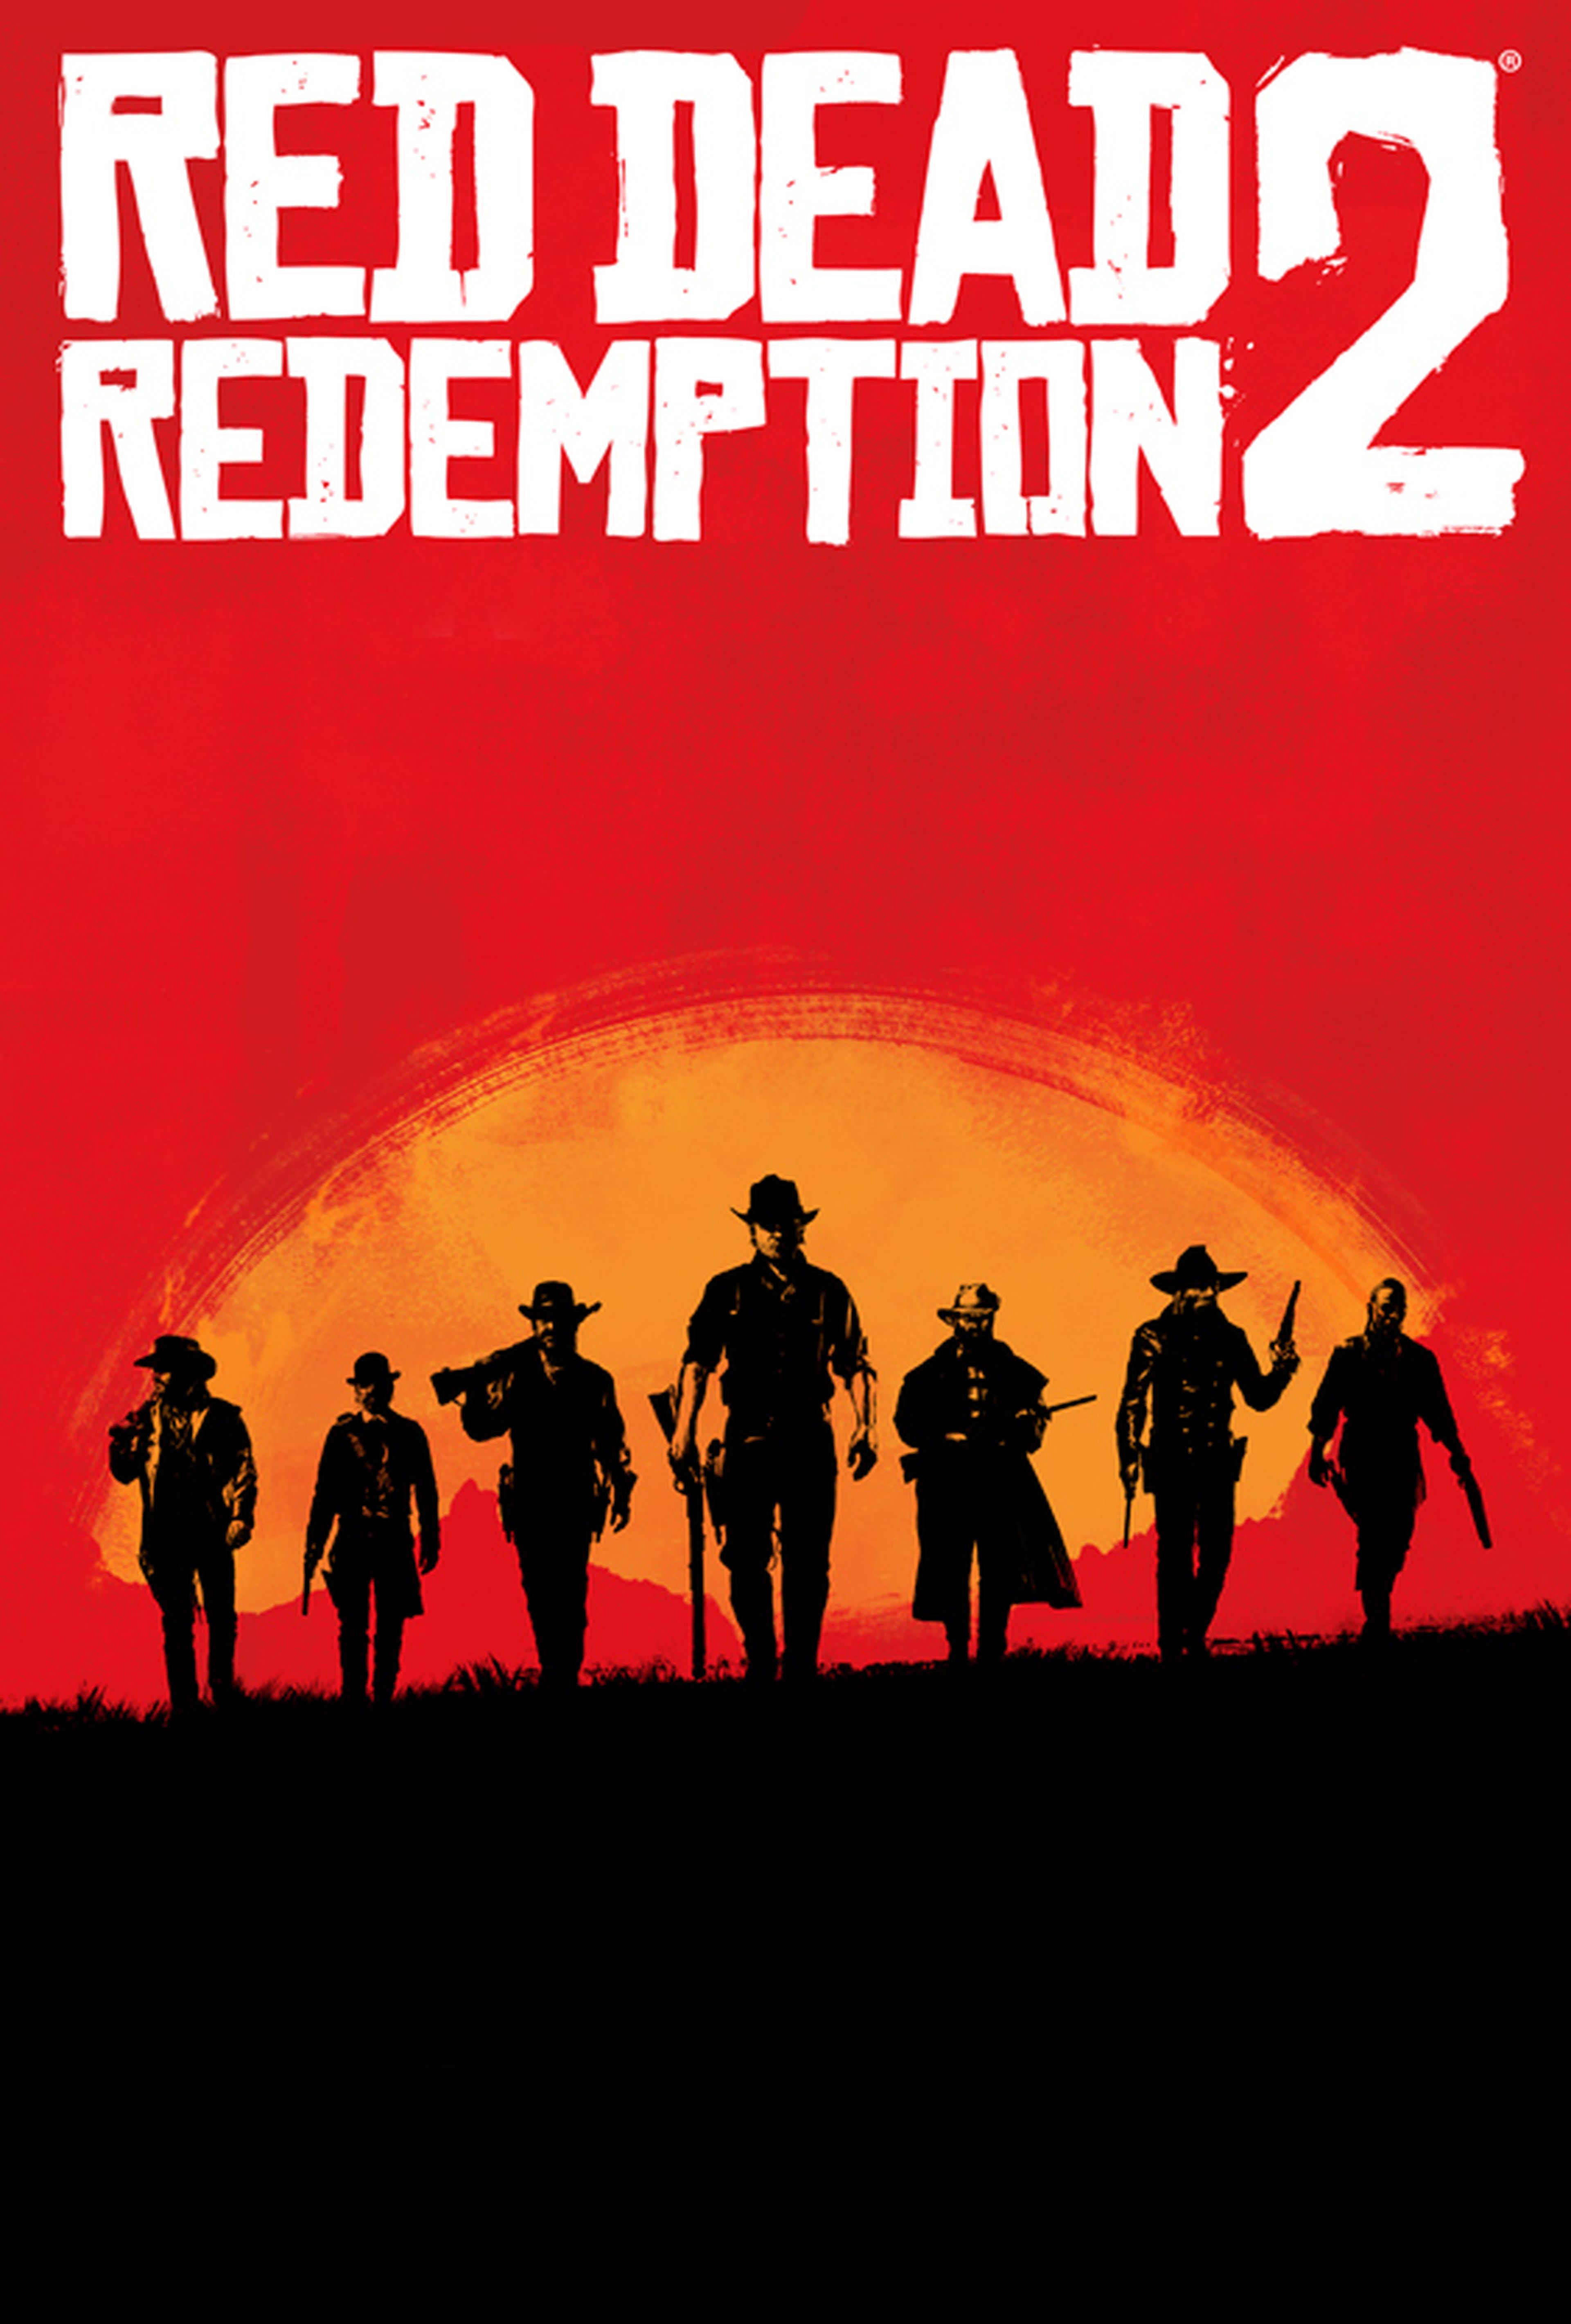 Red Dead Redemption 2 - Carátula (provisional)